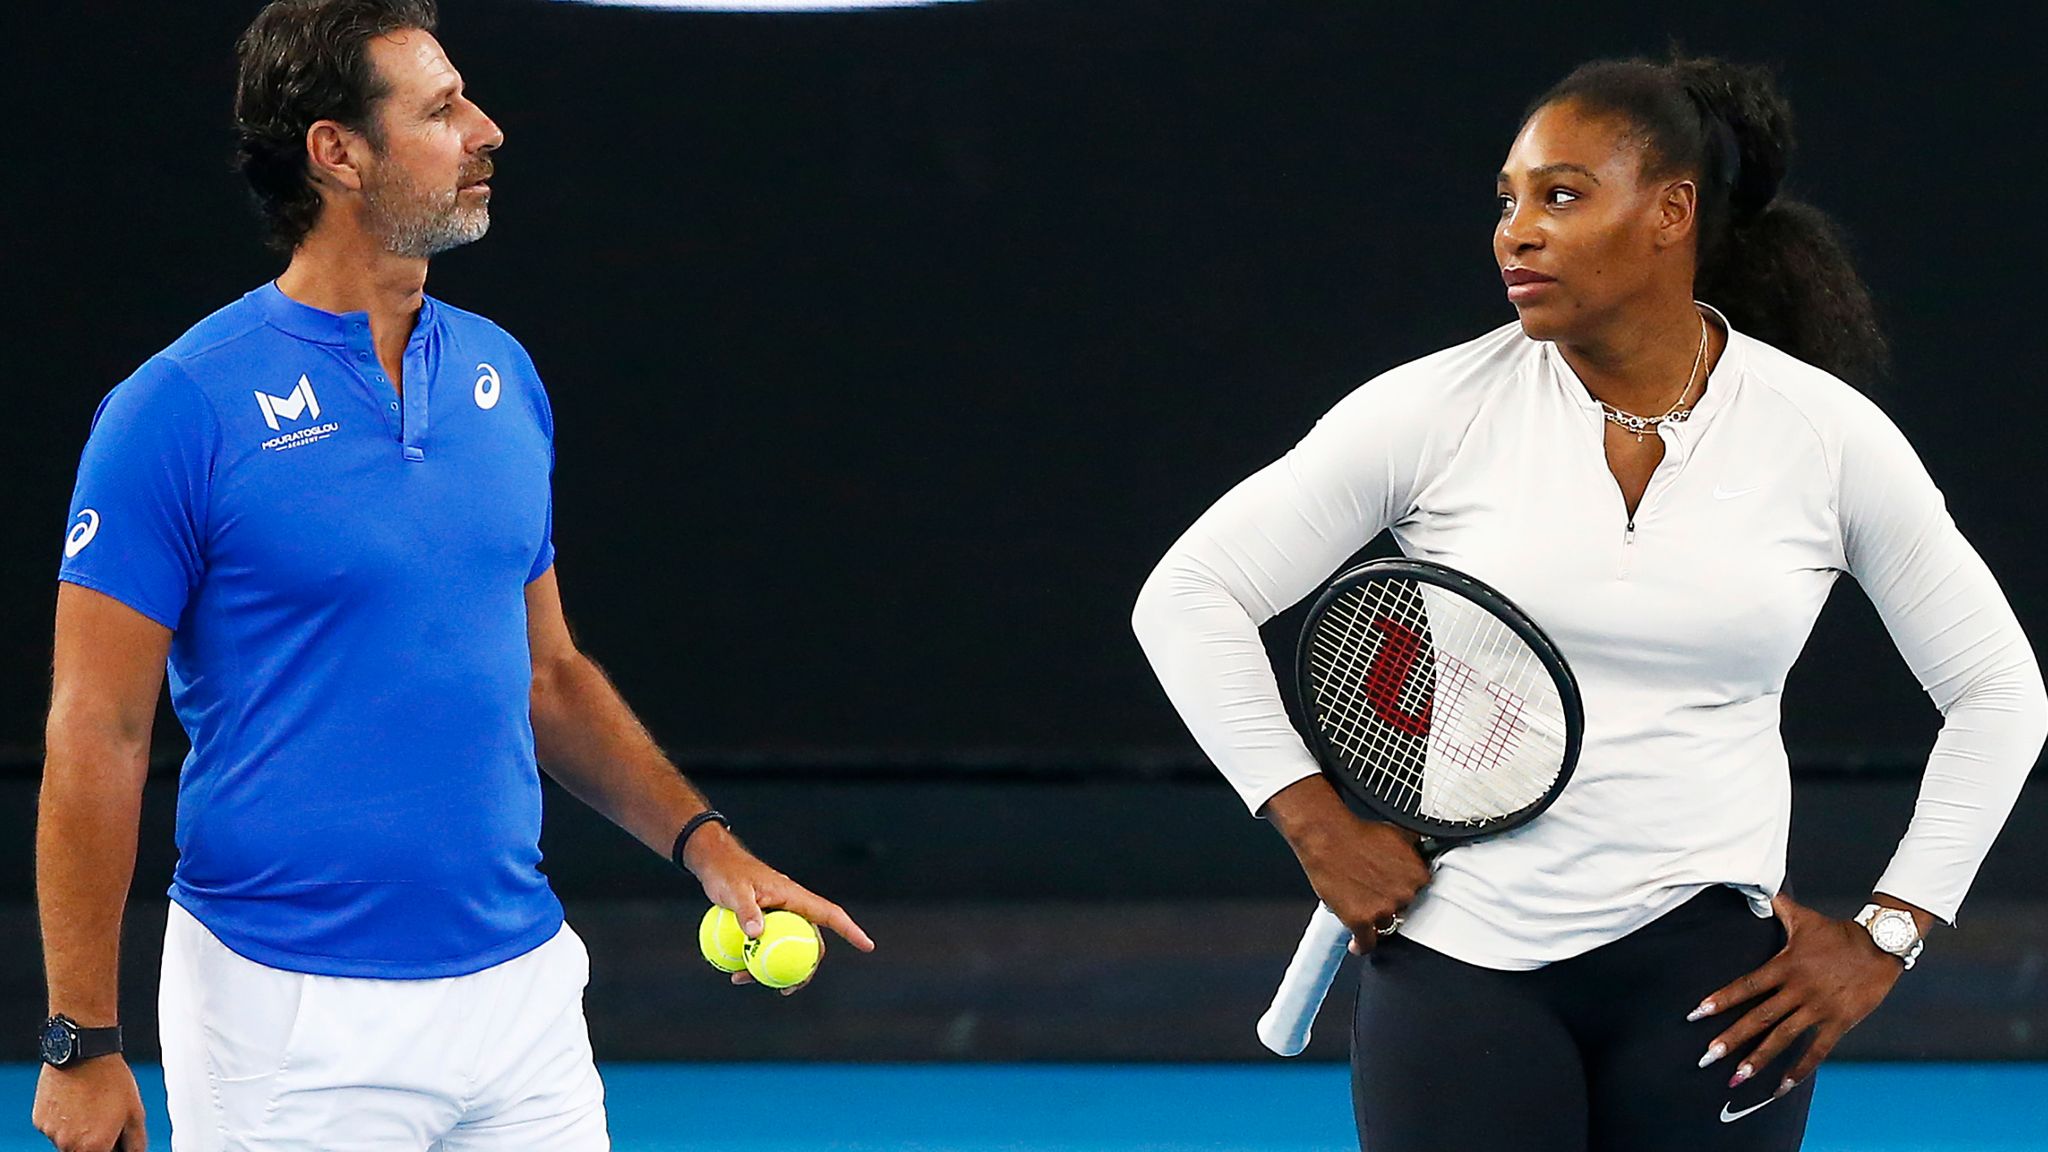 Serena Williams shares video of her 3-year-old daughter Olympia training  with tennis coach Patrick Mouratoglou